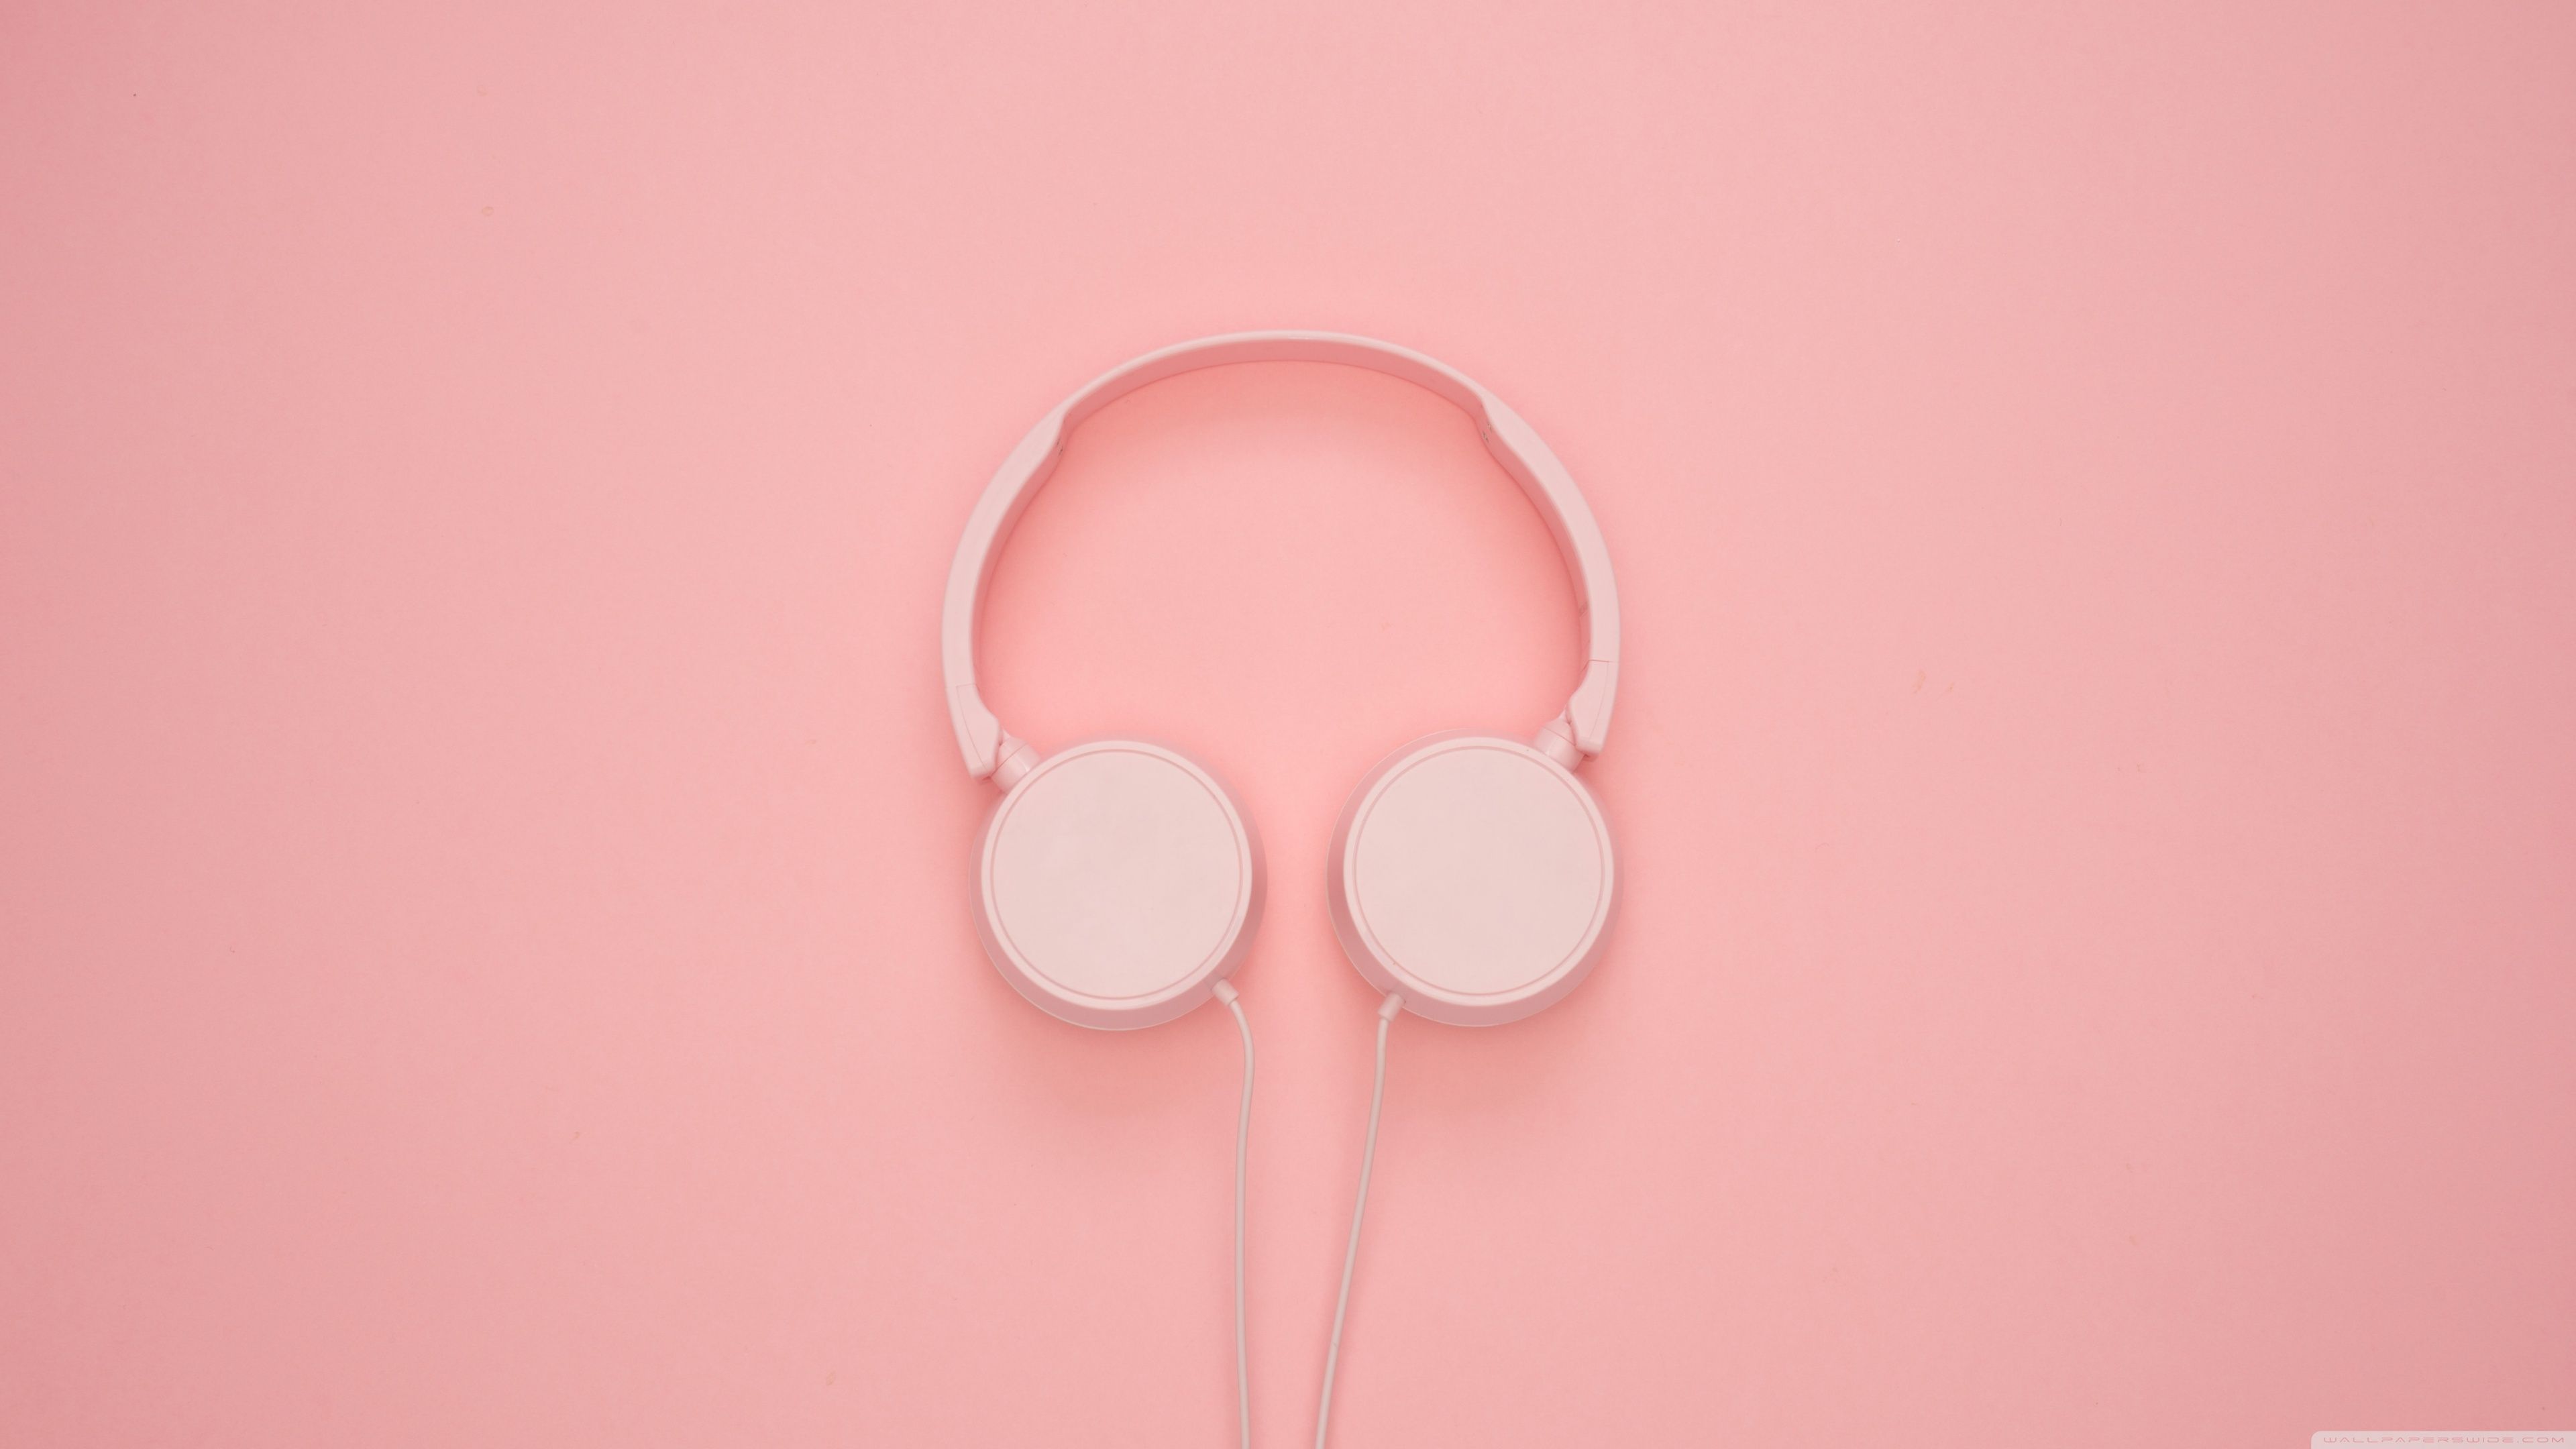 A pair of white headphones on a pink background - 3840x2160